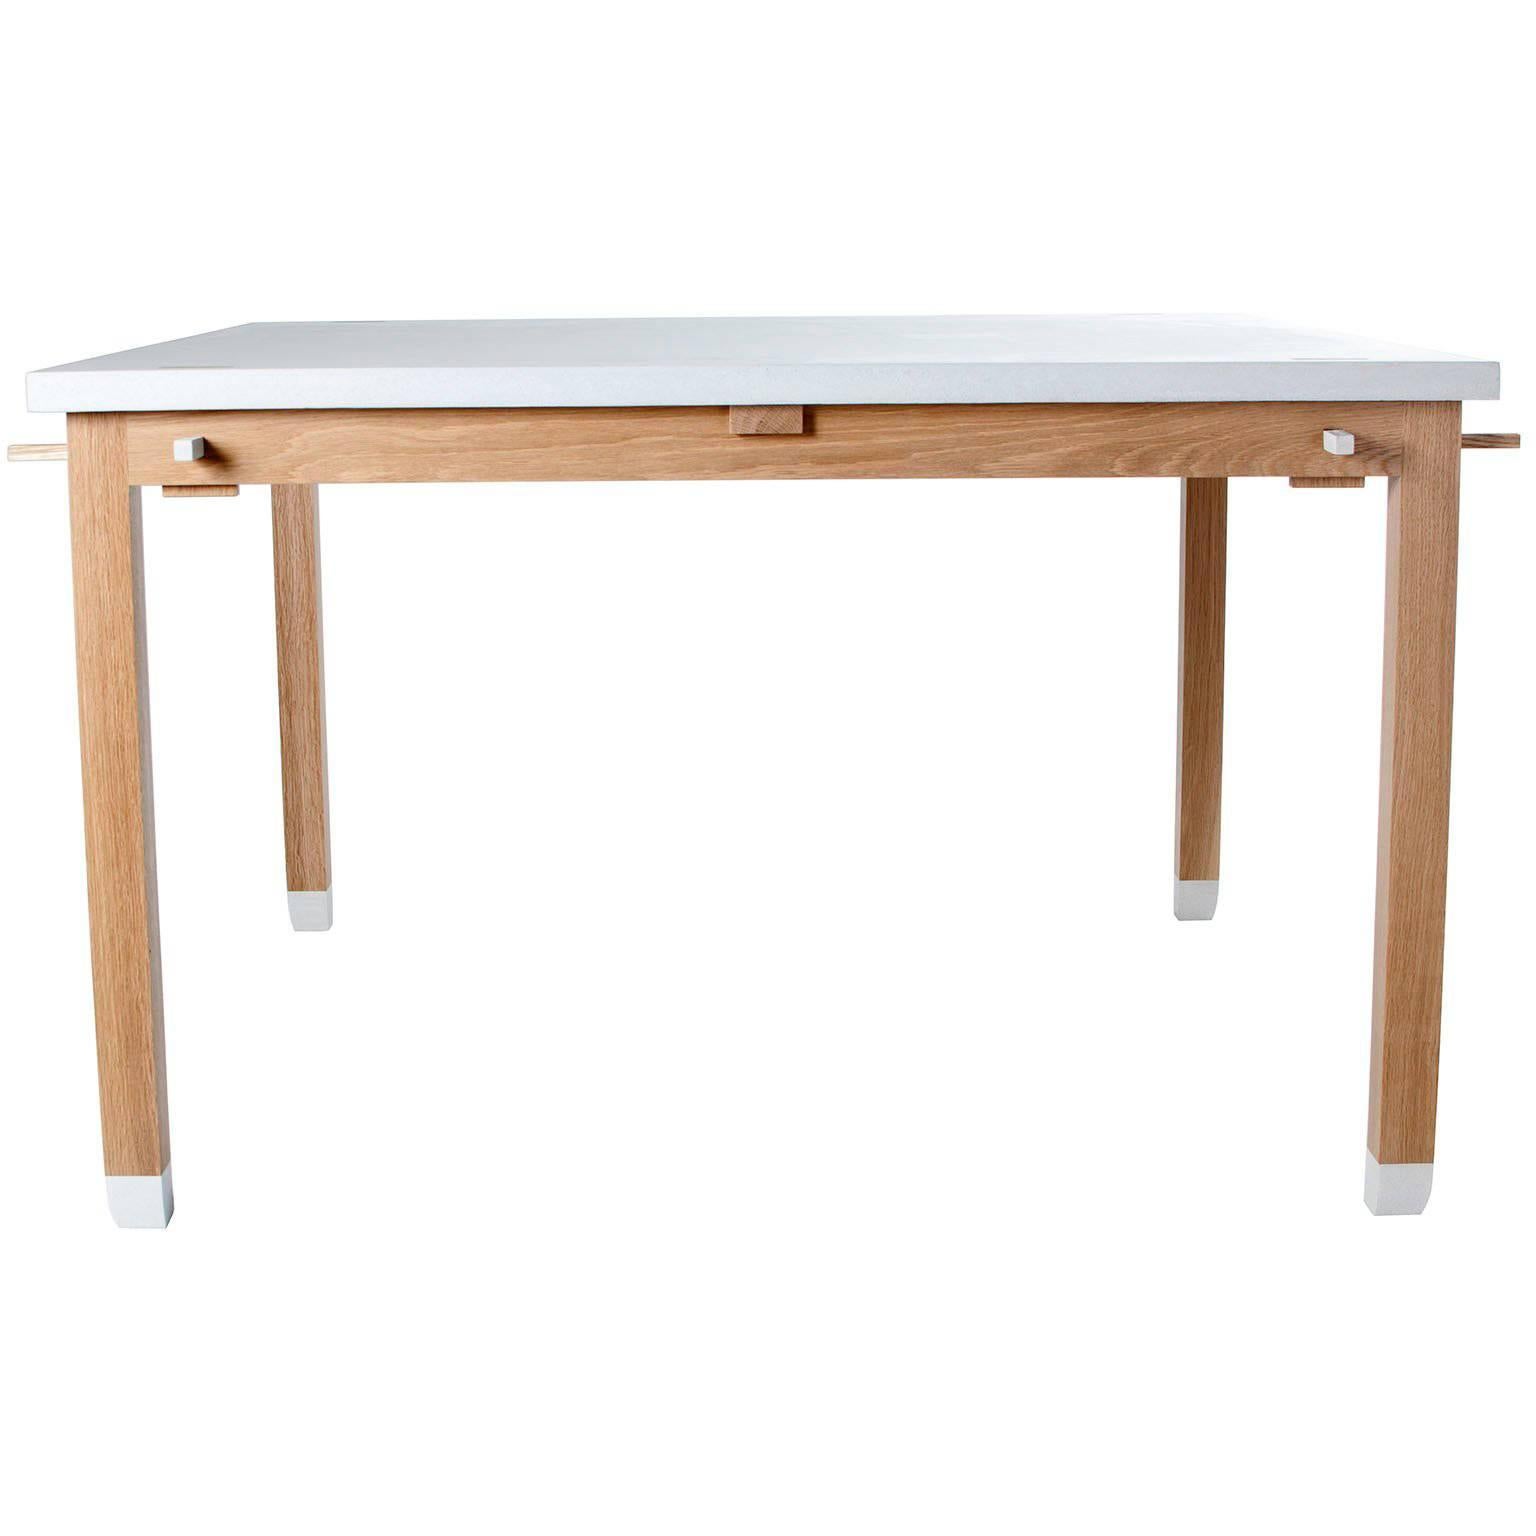 Contemporary Concrete and White Oak Outdoor Garden Dining Table For Sale